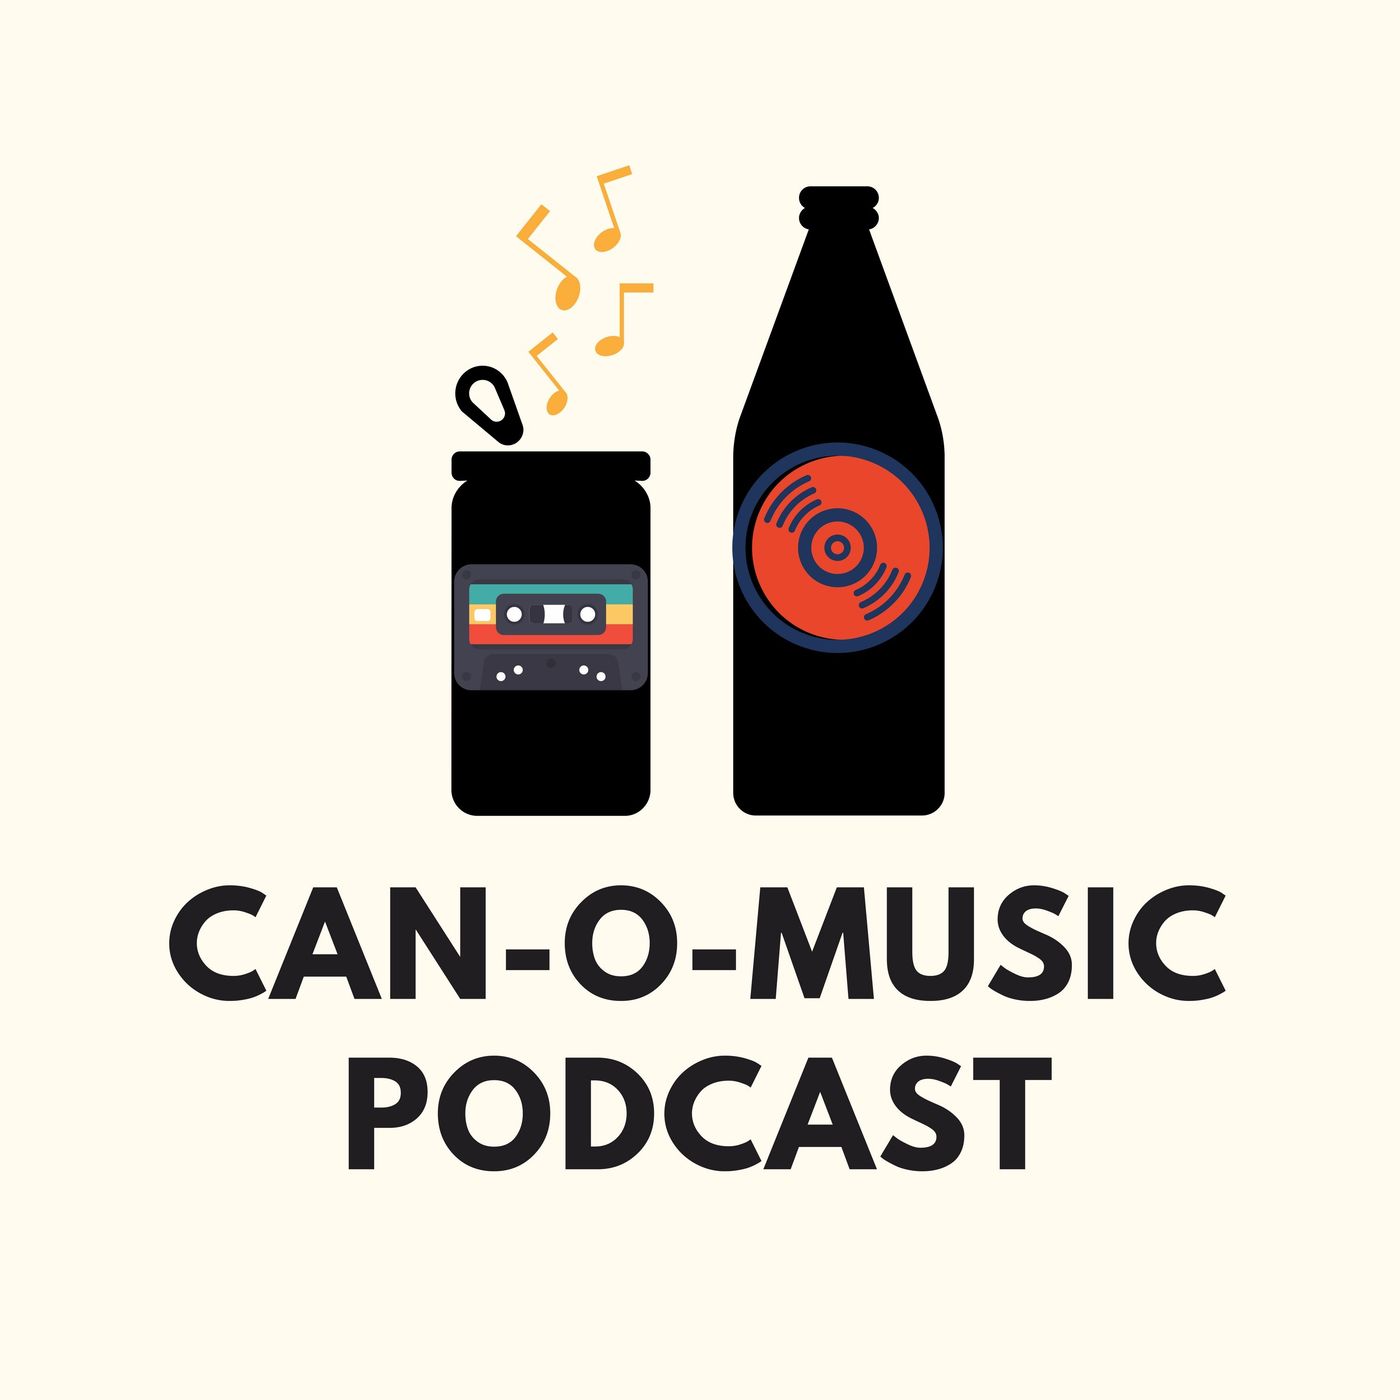 Can-O-Music Podcast